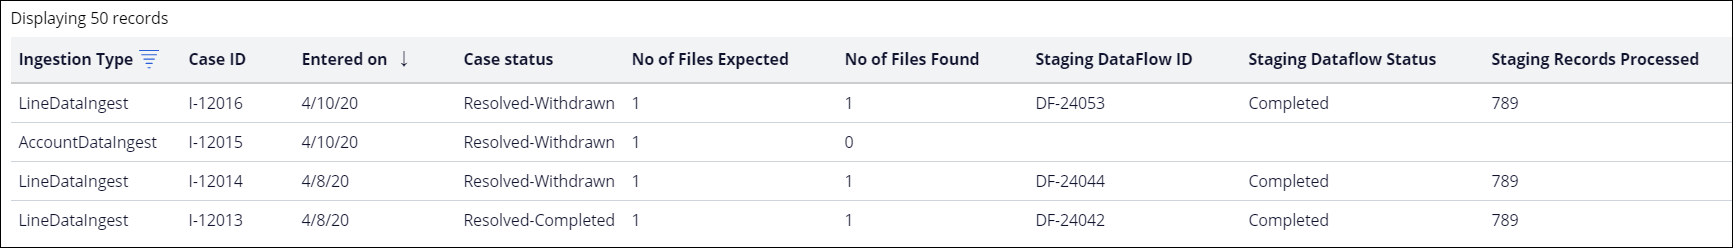 The report contains data for several ingestion case runs. Details of each
                        run are provided, such as the case ID, case status, the number of files
                        expected and found, the data flow ID, and so on.